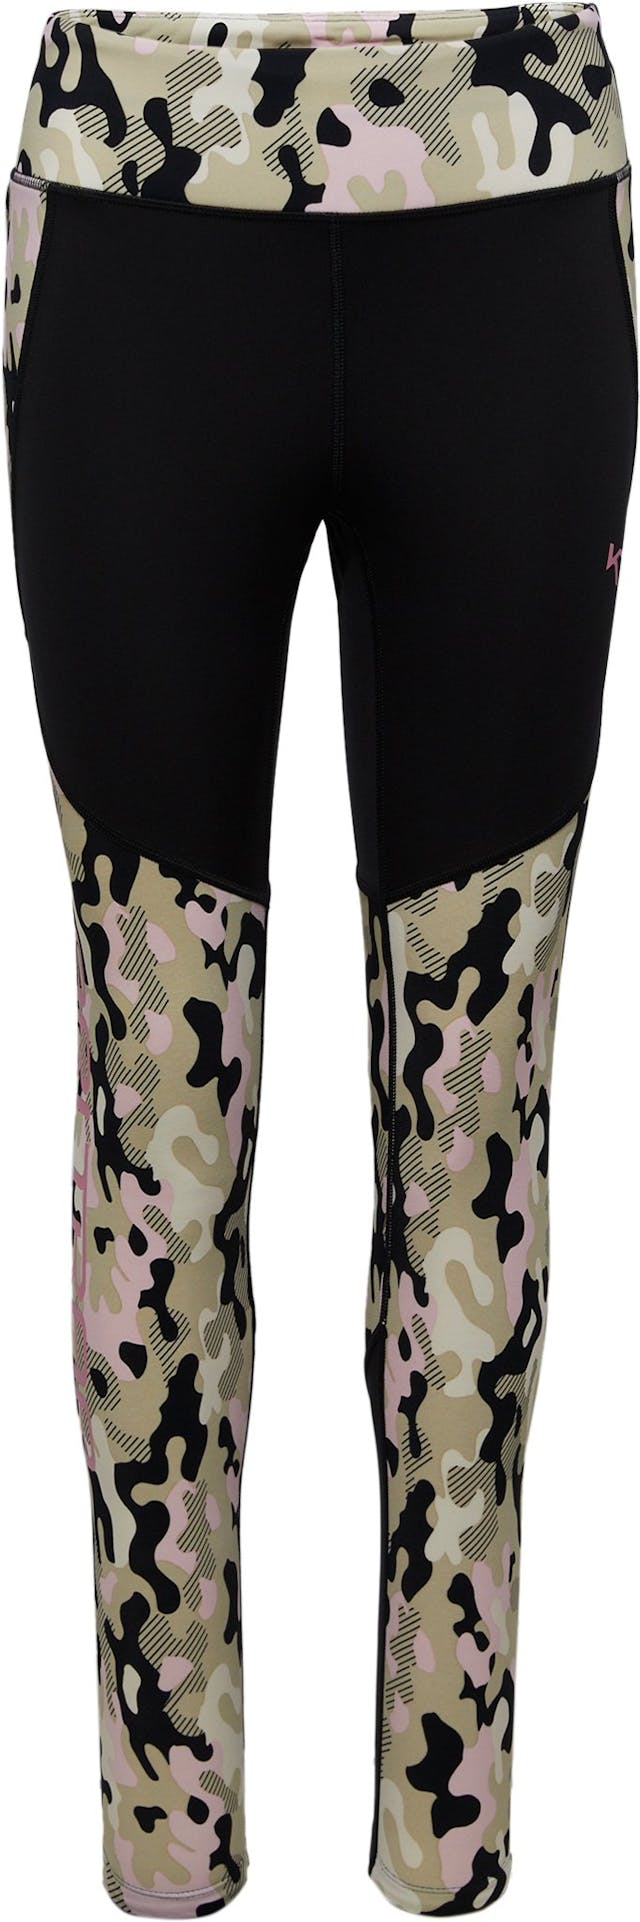 Product image for Tirill Tights - Women's